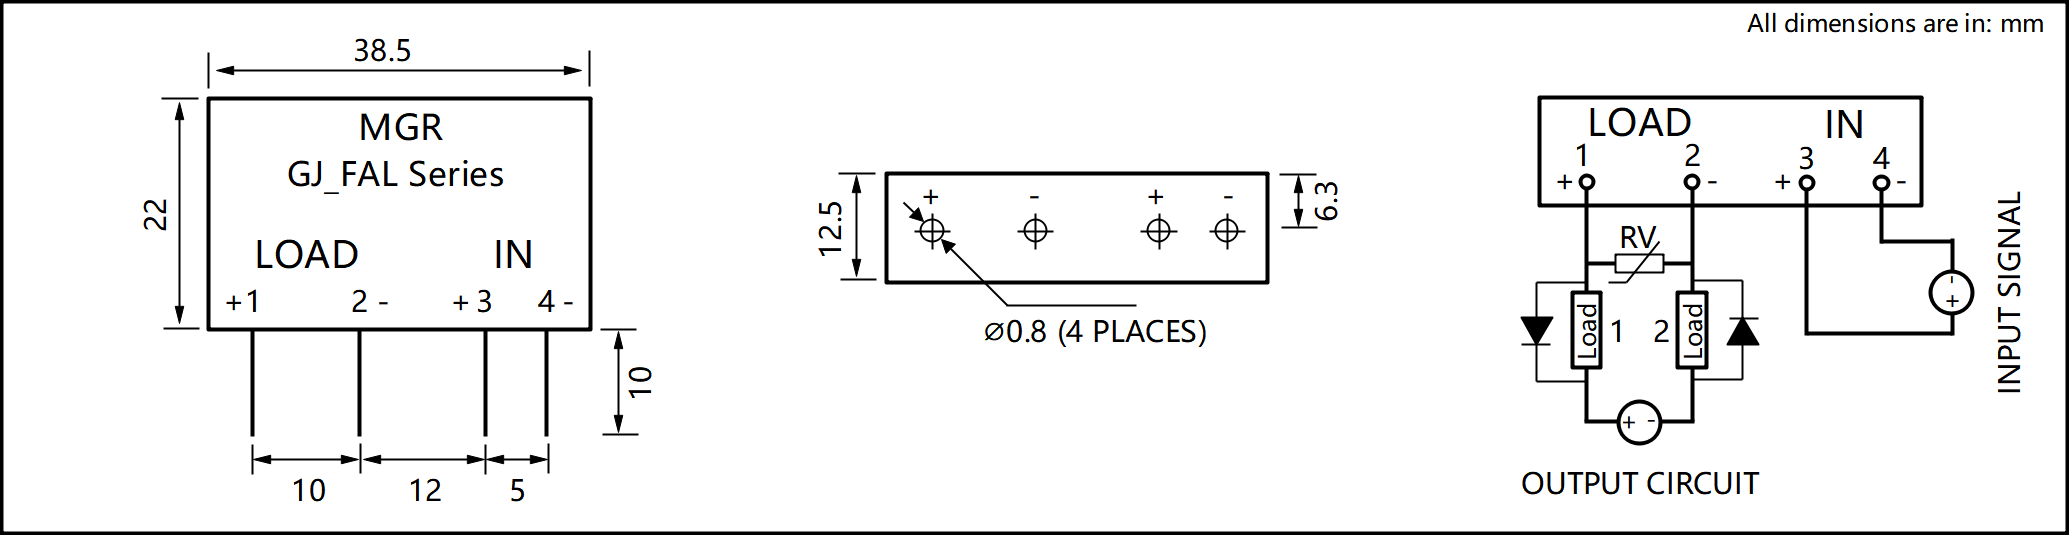 GJ_FAL Series PCB Mount Solid State Relay diagram